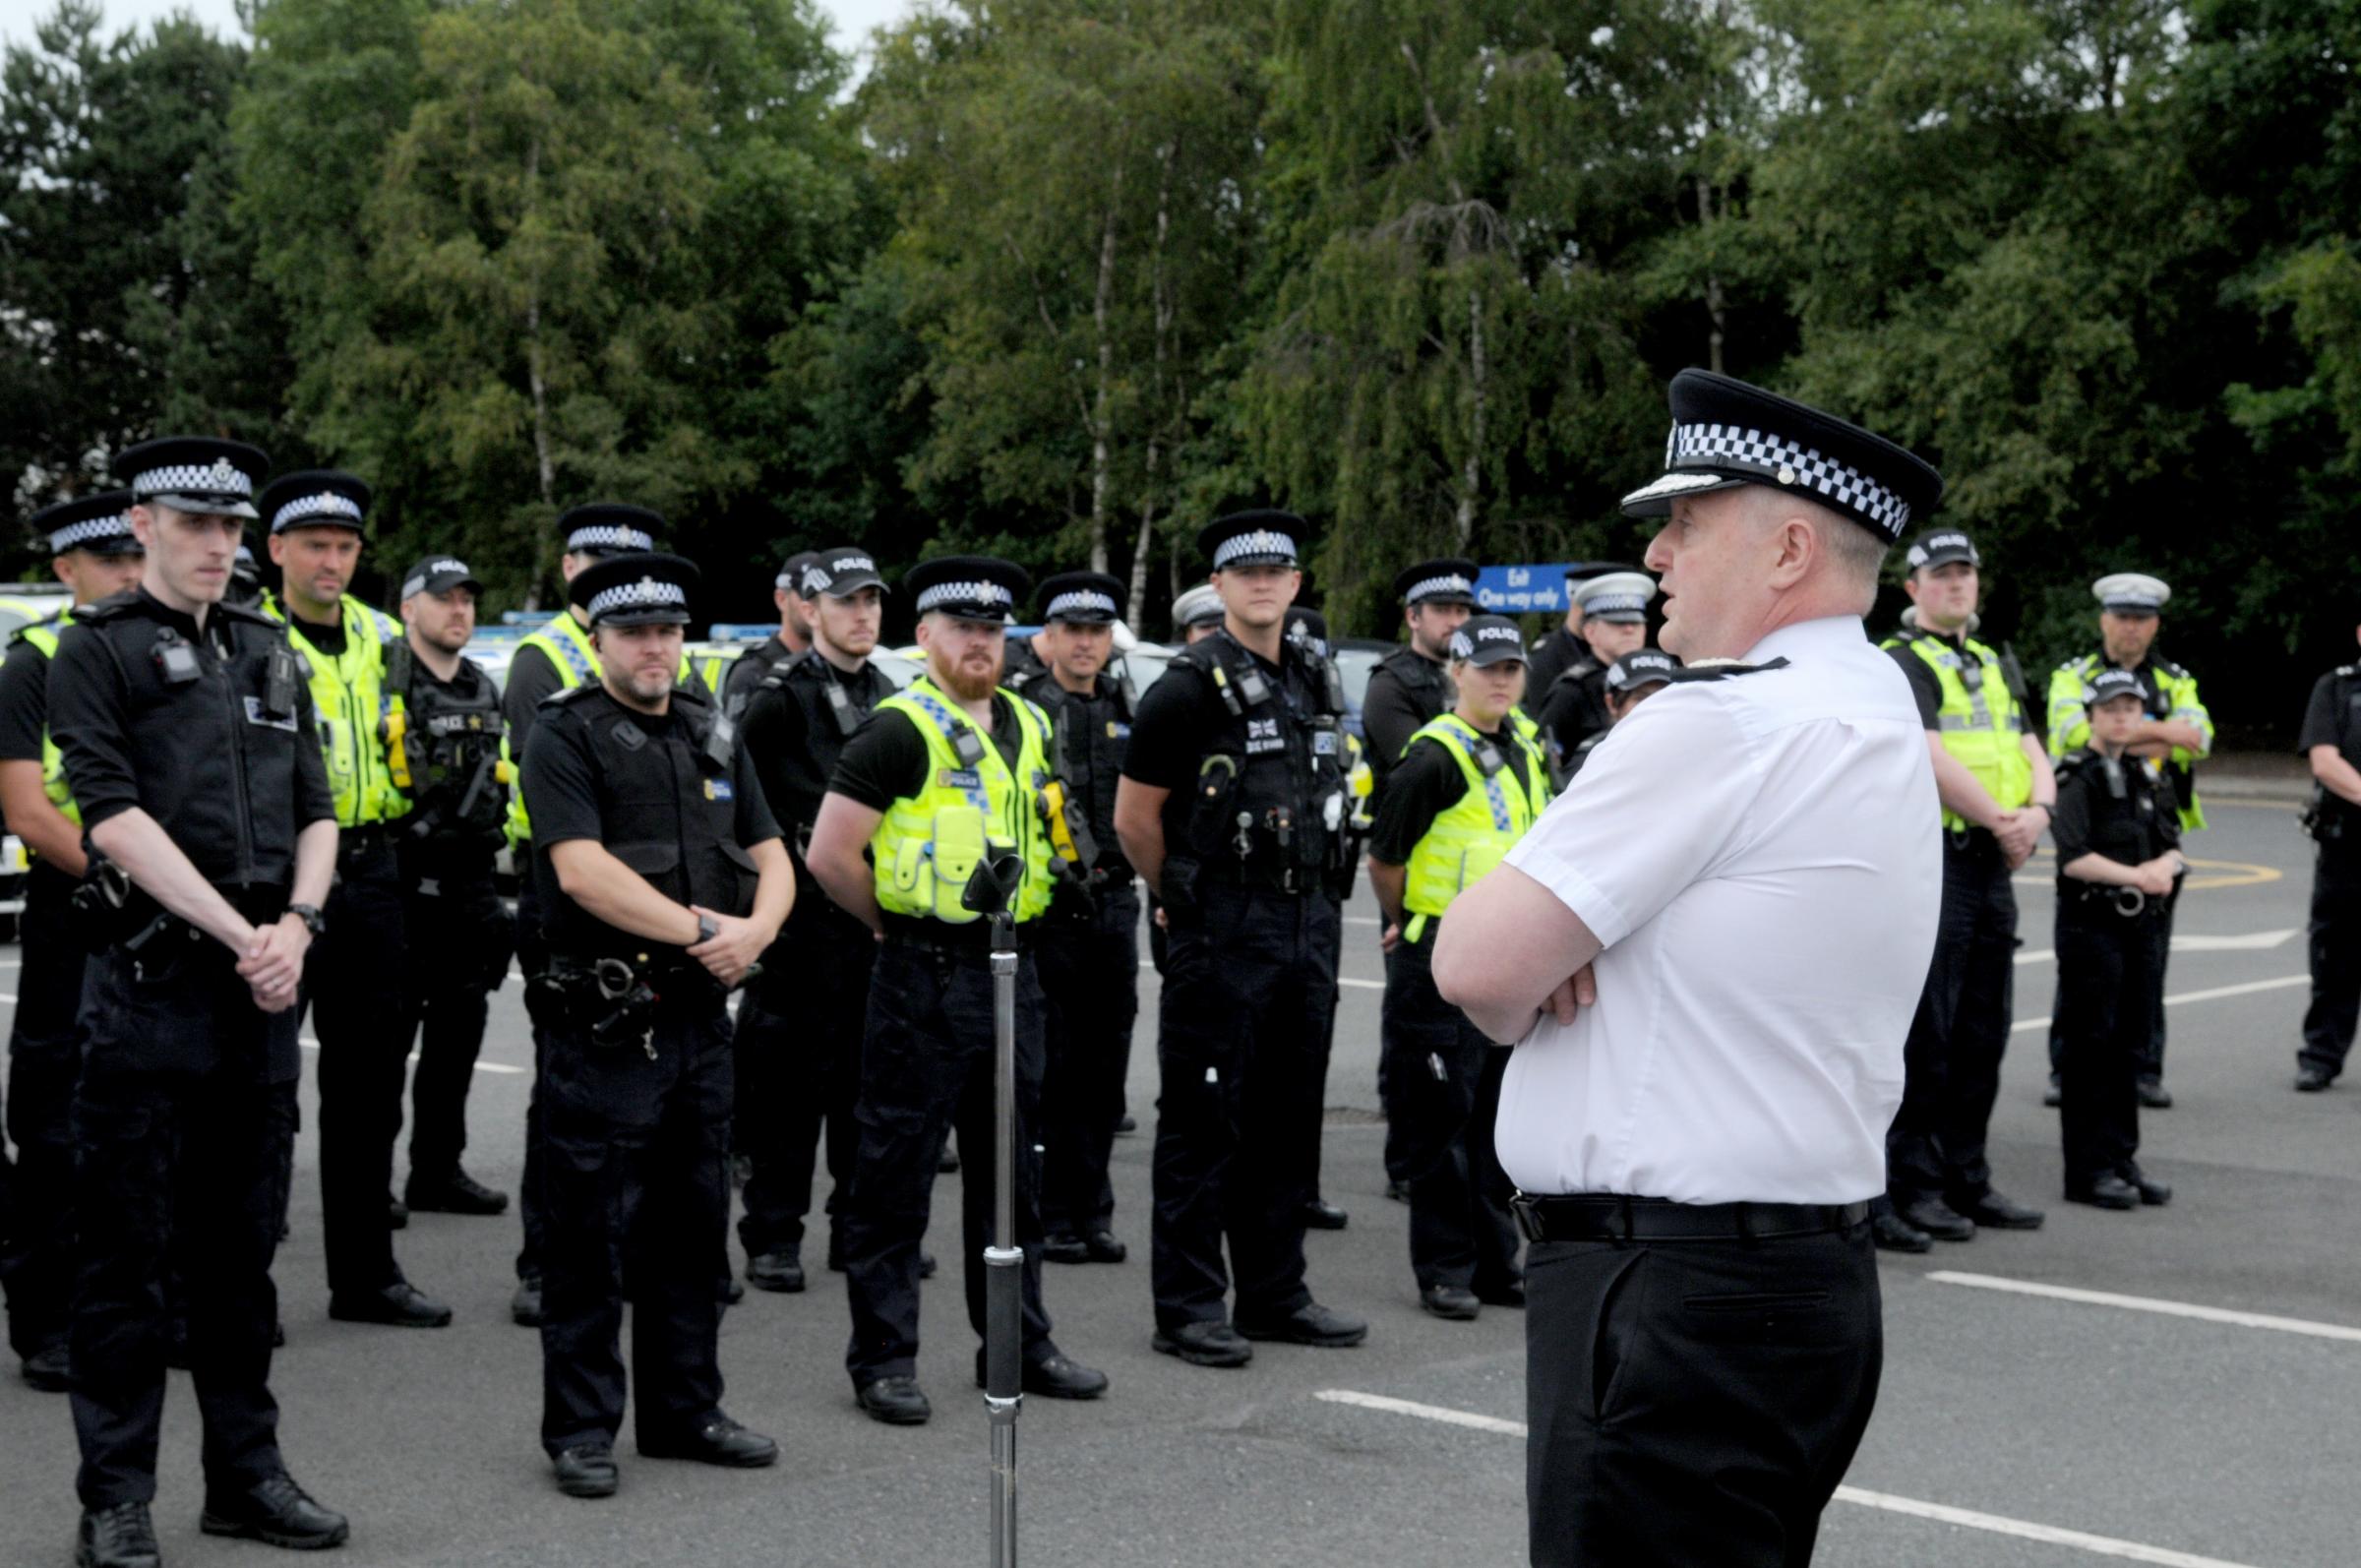 Cheshire Police chief constable Mark Roberts briefs officers (Image: Dave Gillespie)